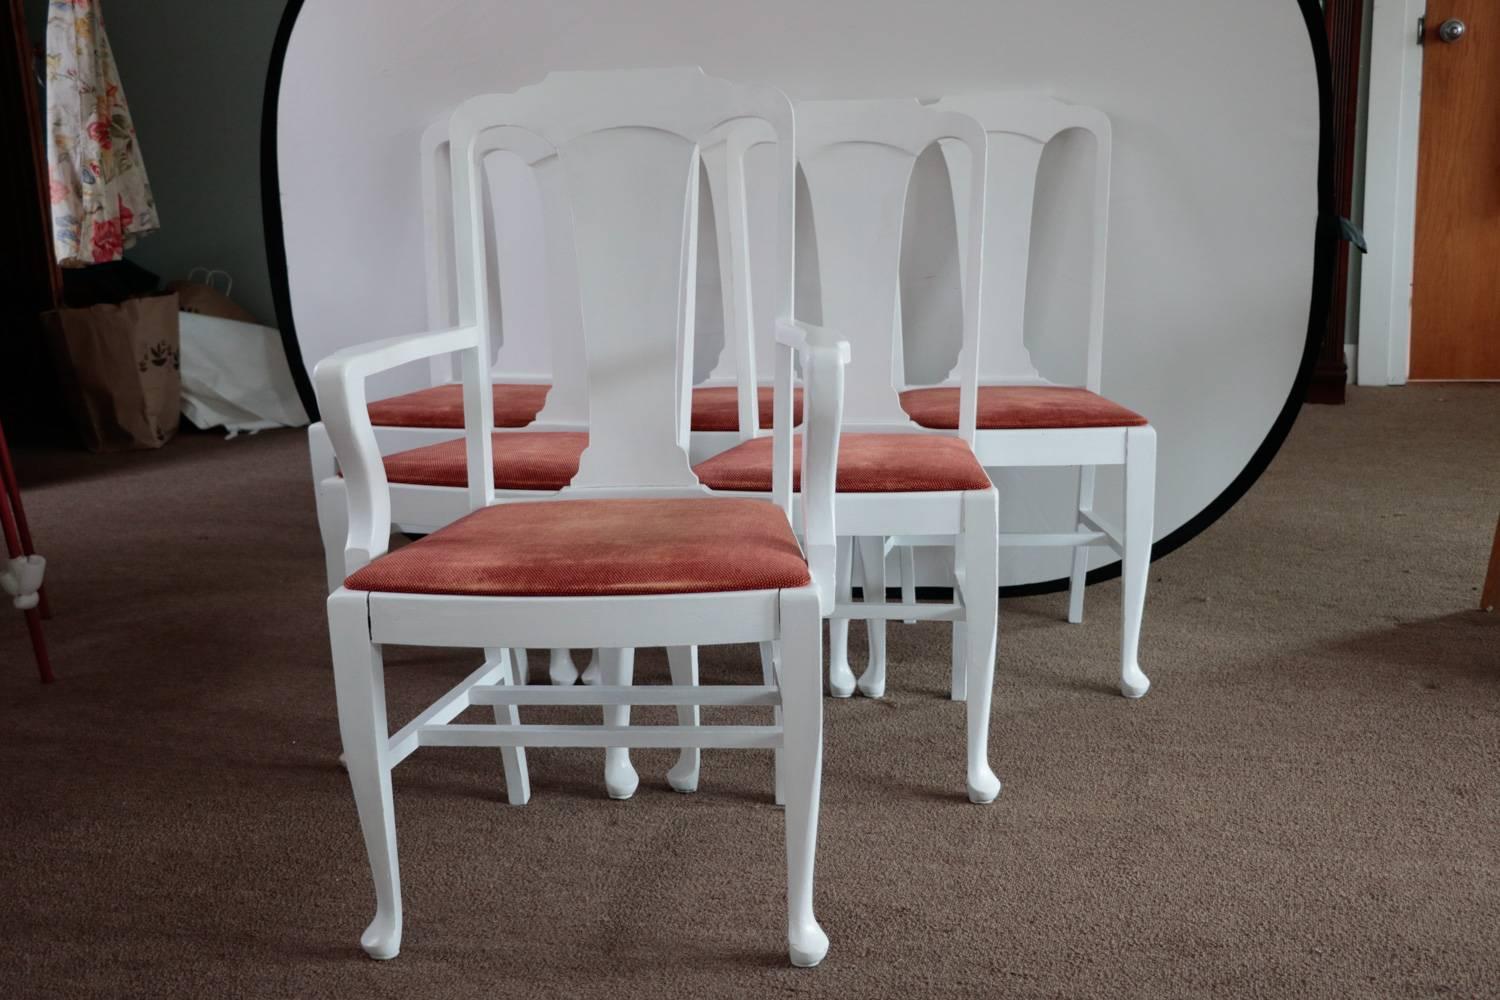 Set of six hale dining chairs 1900s painted high gloss white. Stamped on the bottom. Relatively newly upholstered. Fine condition. Well made.

One King armchair - back in the day only the man would get an armchair.
Queen head of the table and